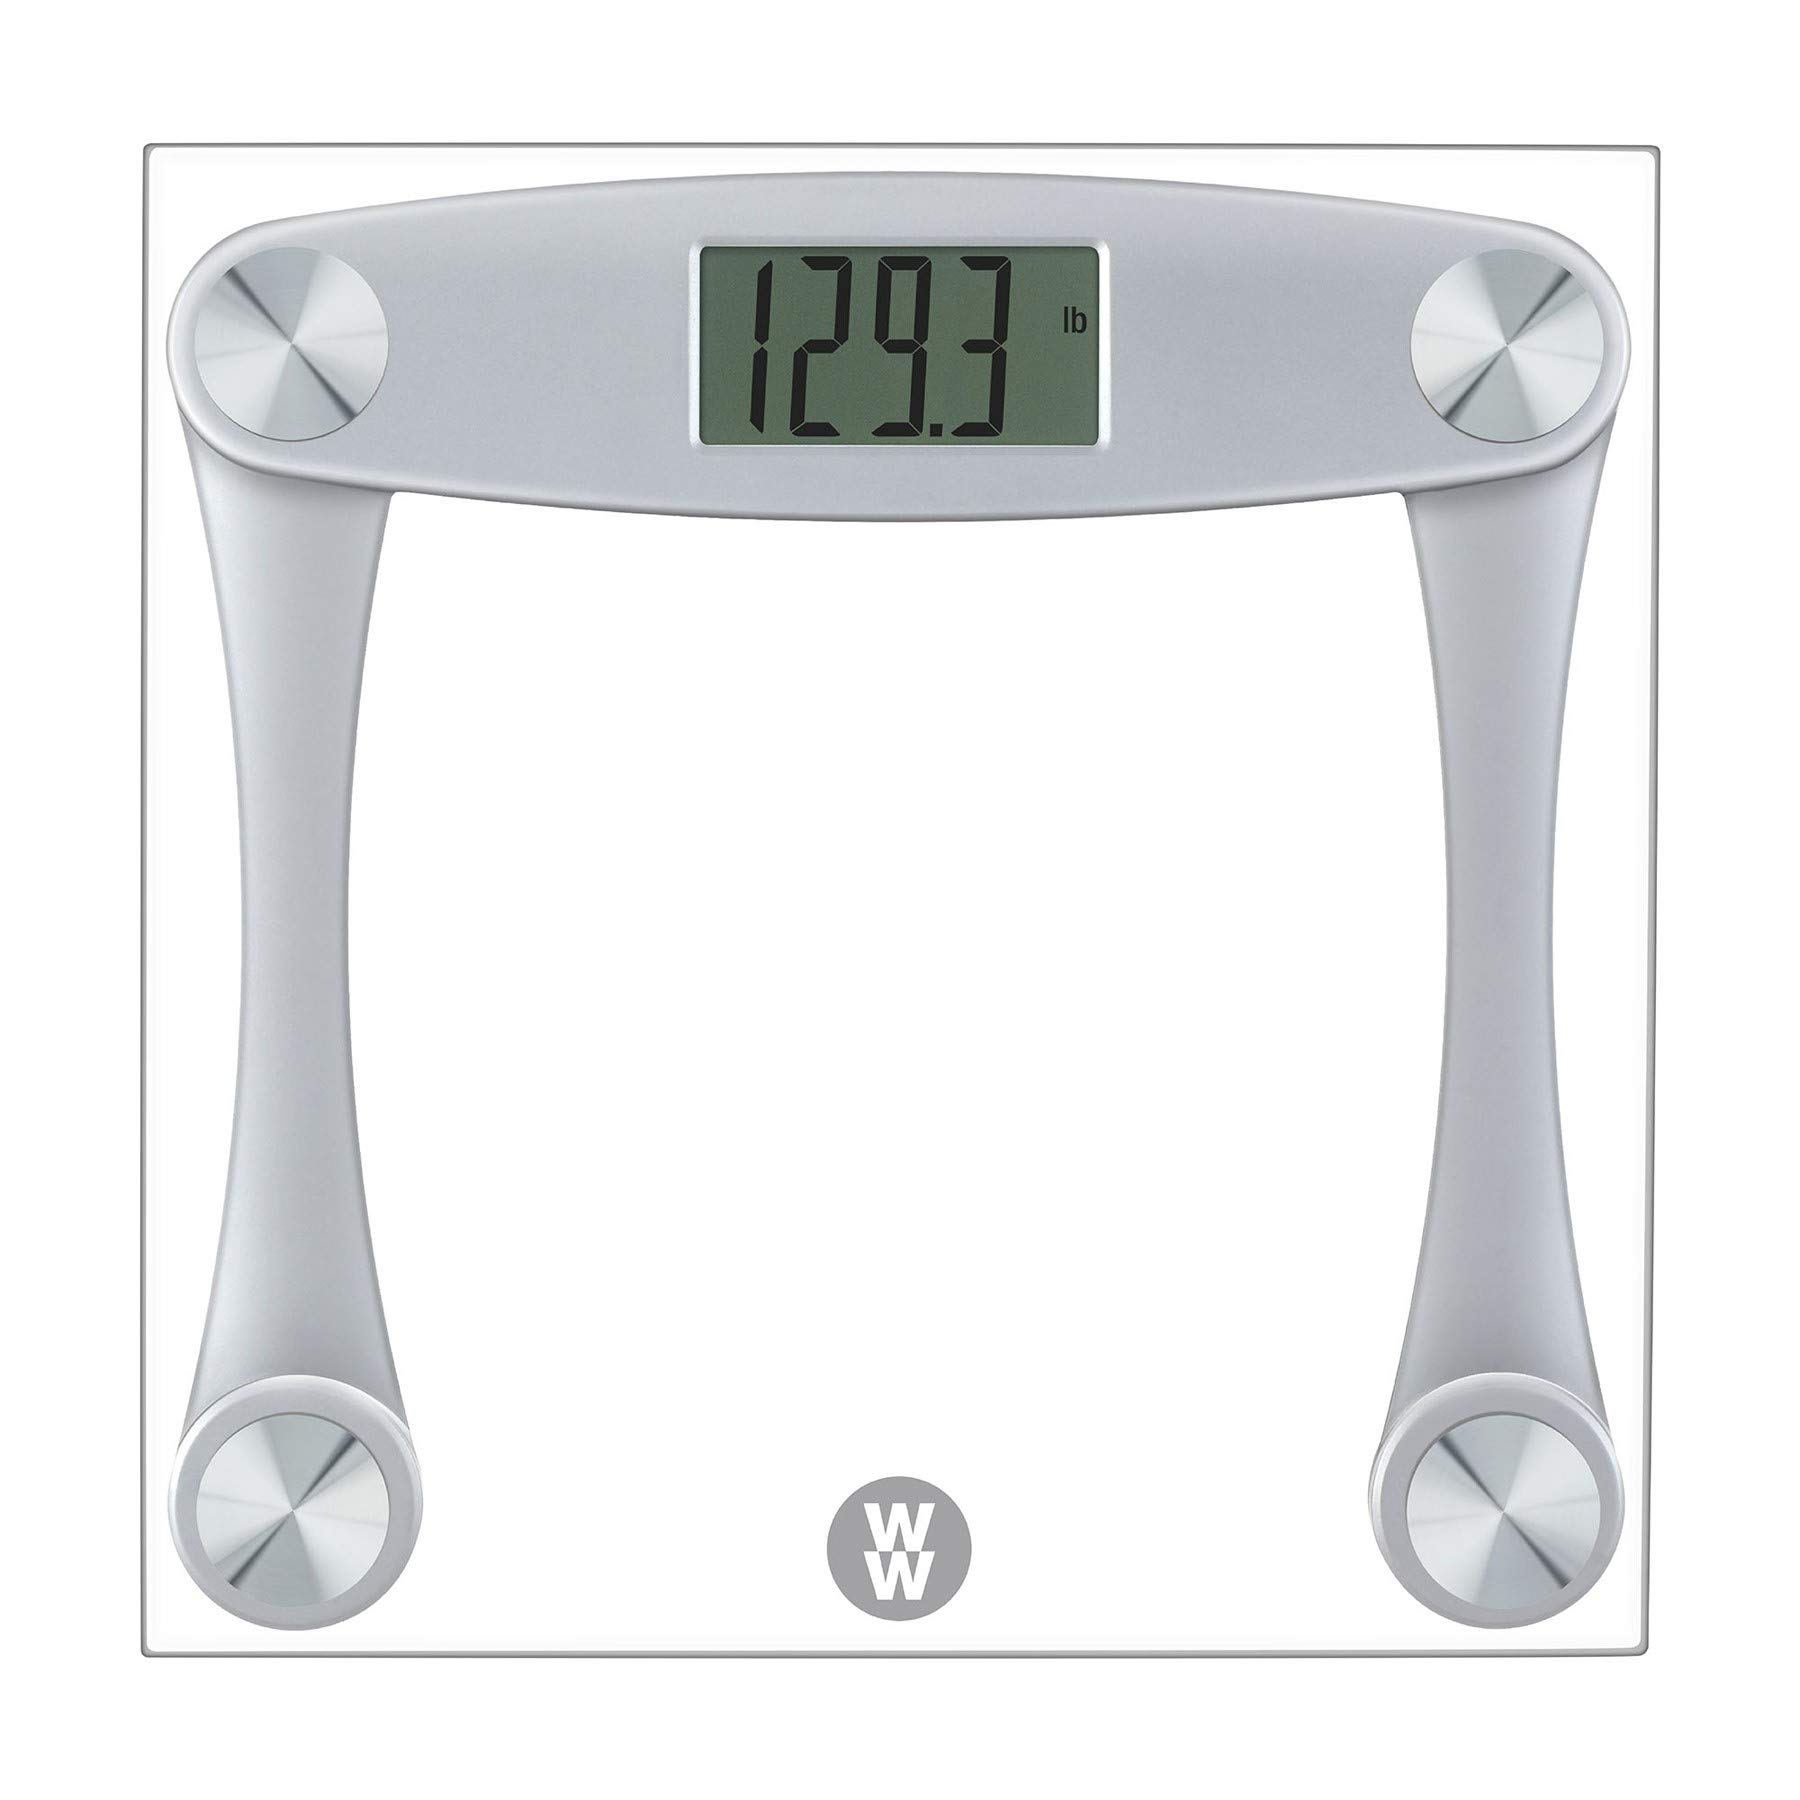 Weight Watchers by Conair Scales by Conair Digital Glass Bathroom Scale 400  Lbs.